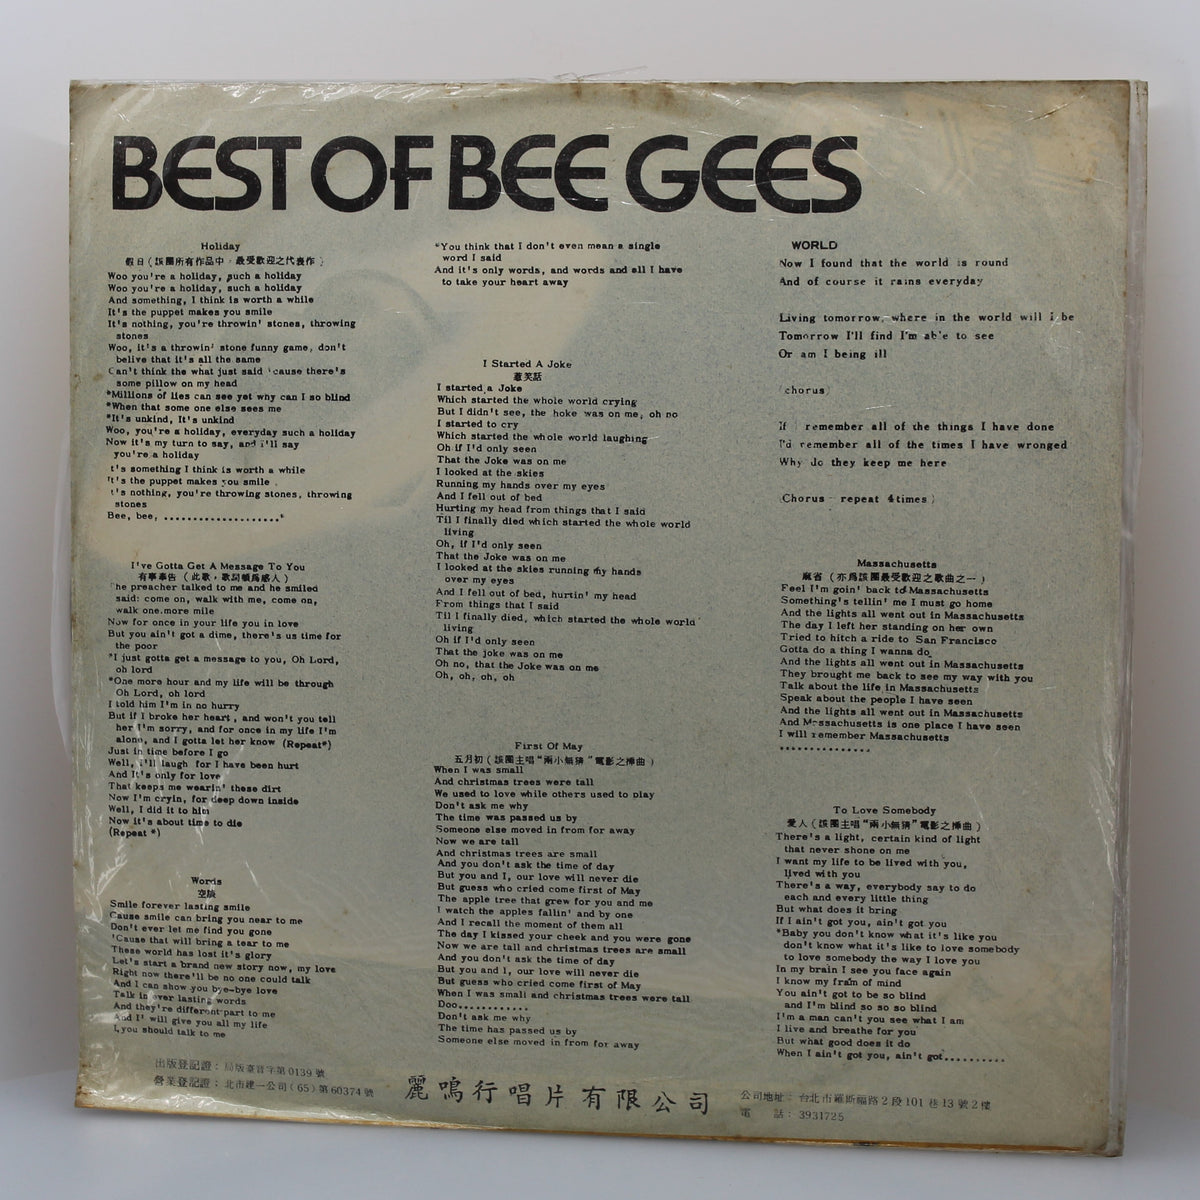 Bee Gees – Best Of Bee Gees, Vinyl, LP, Compilation, Unofficial Release, Withe Label, Taiwan